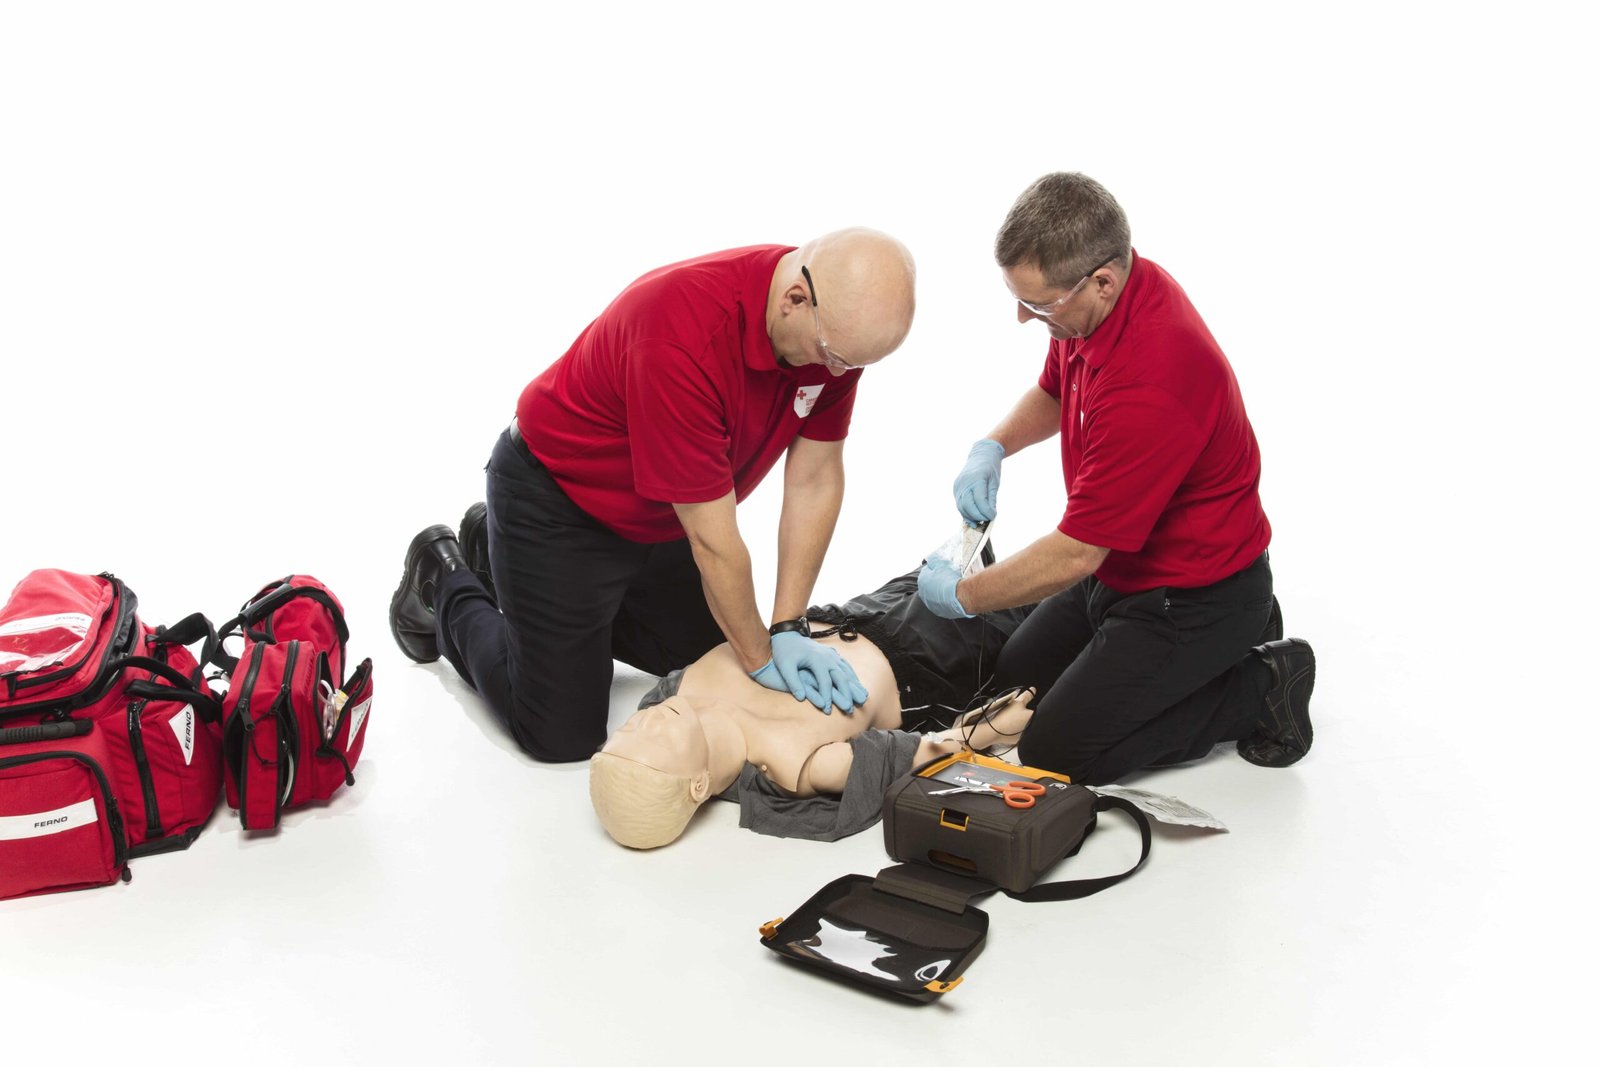 Why You Should Consider a Remote First Aid Course?